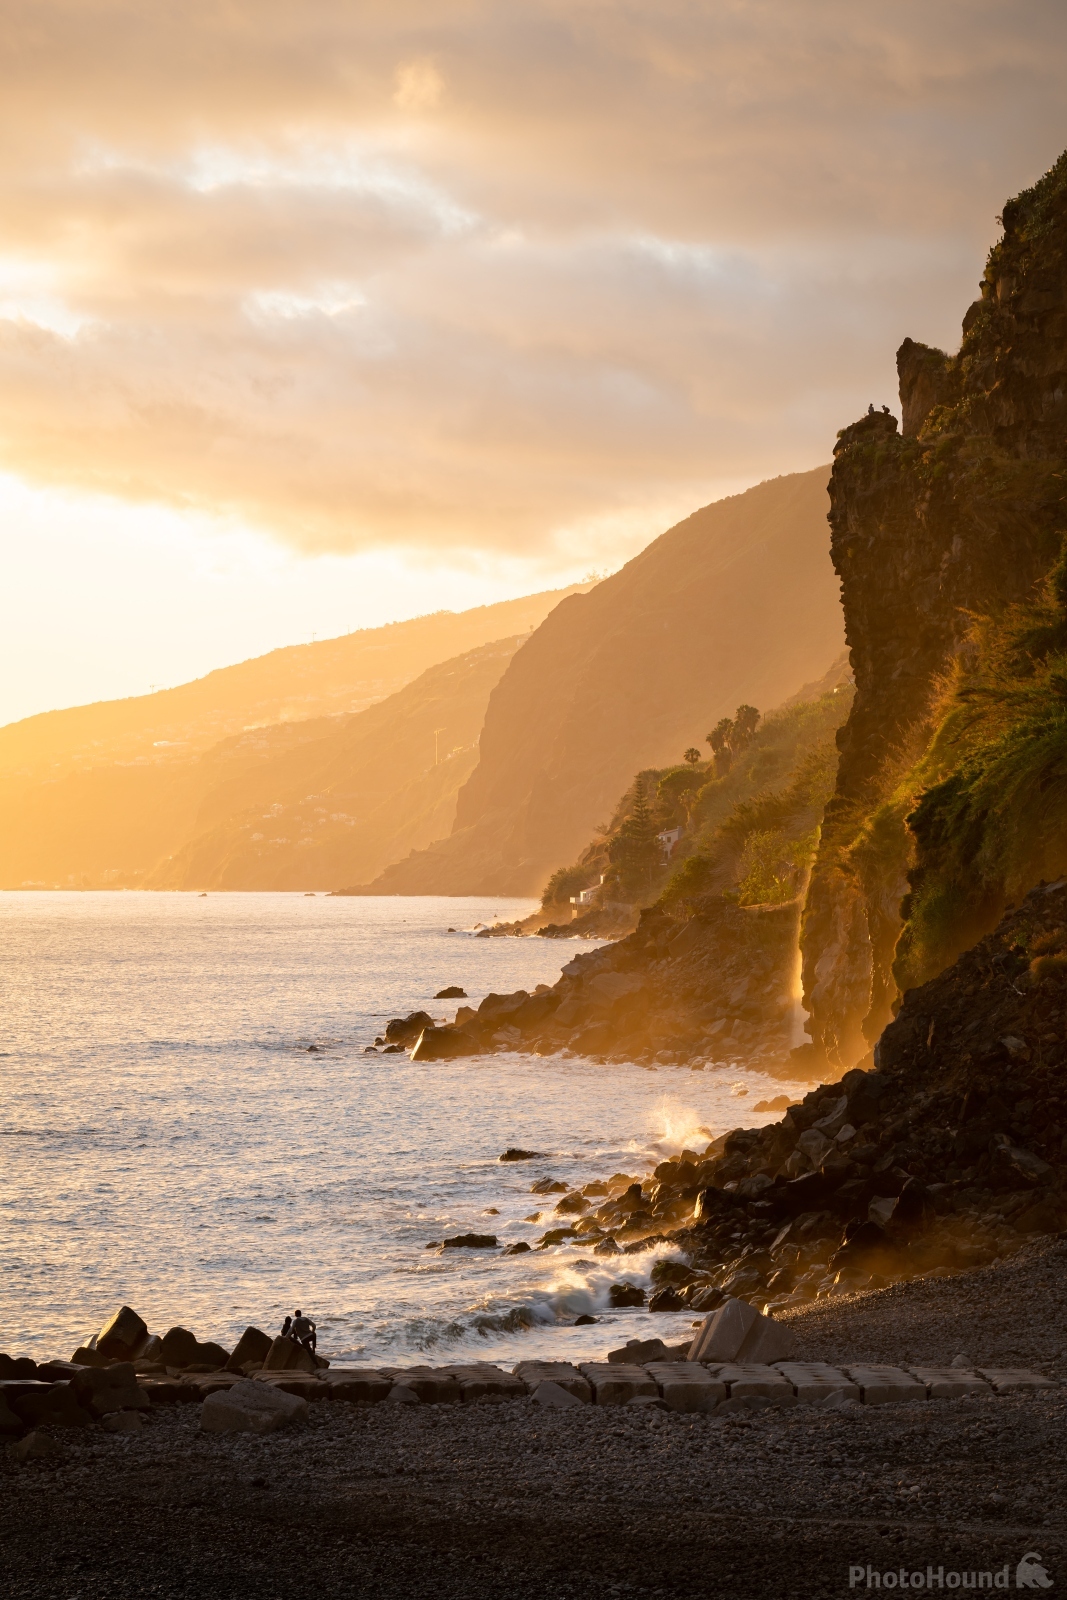 Image of Ponta do Sol Seascape, Madeira by VOJTa Herout